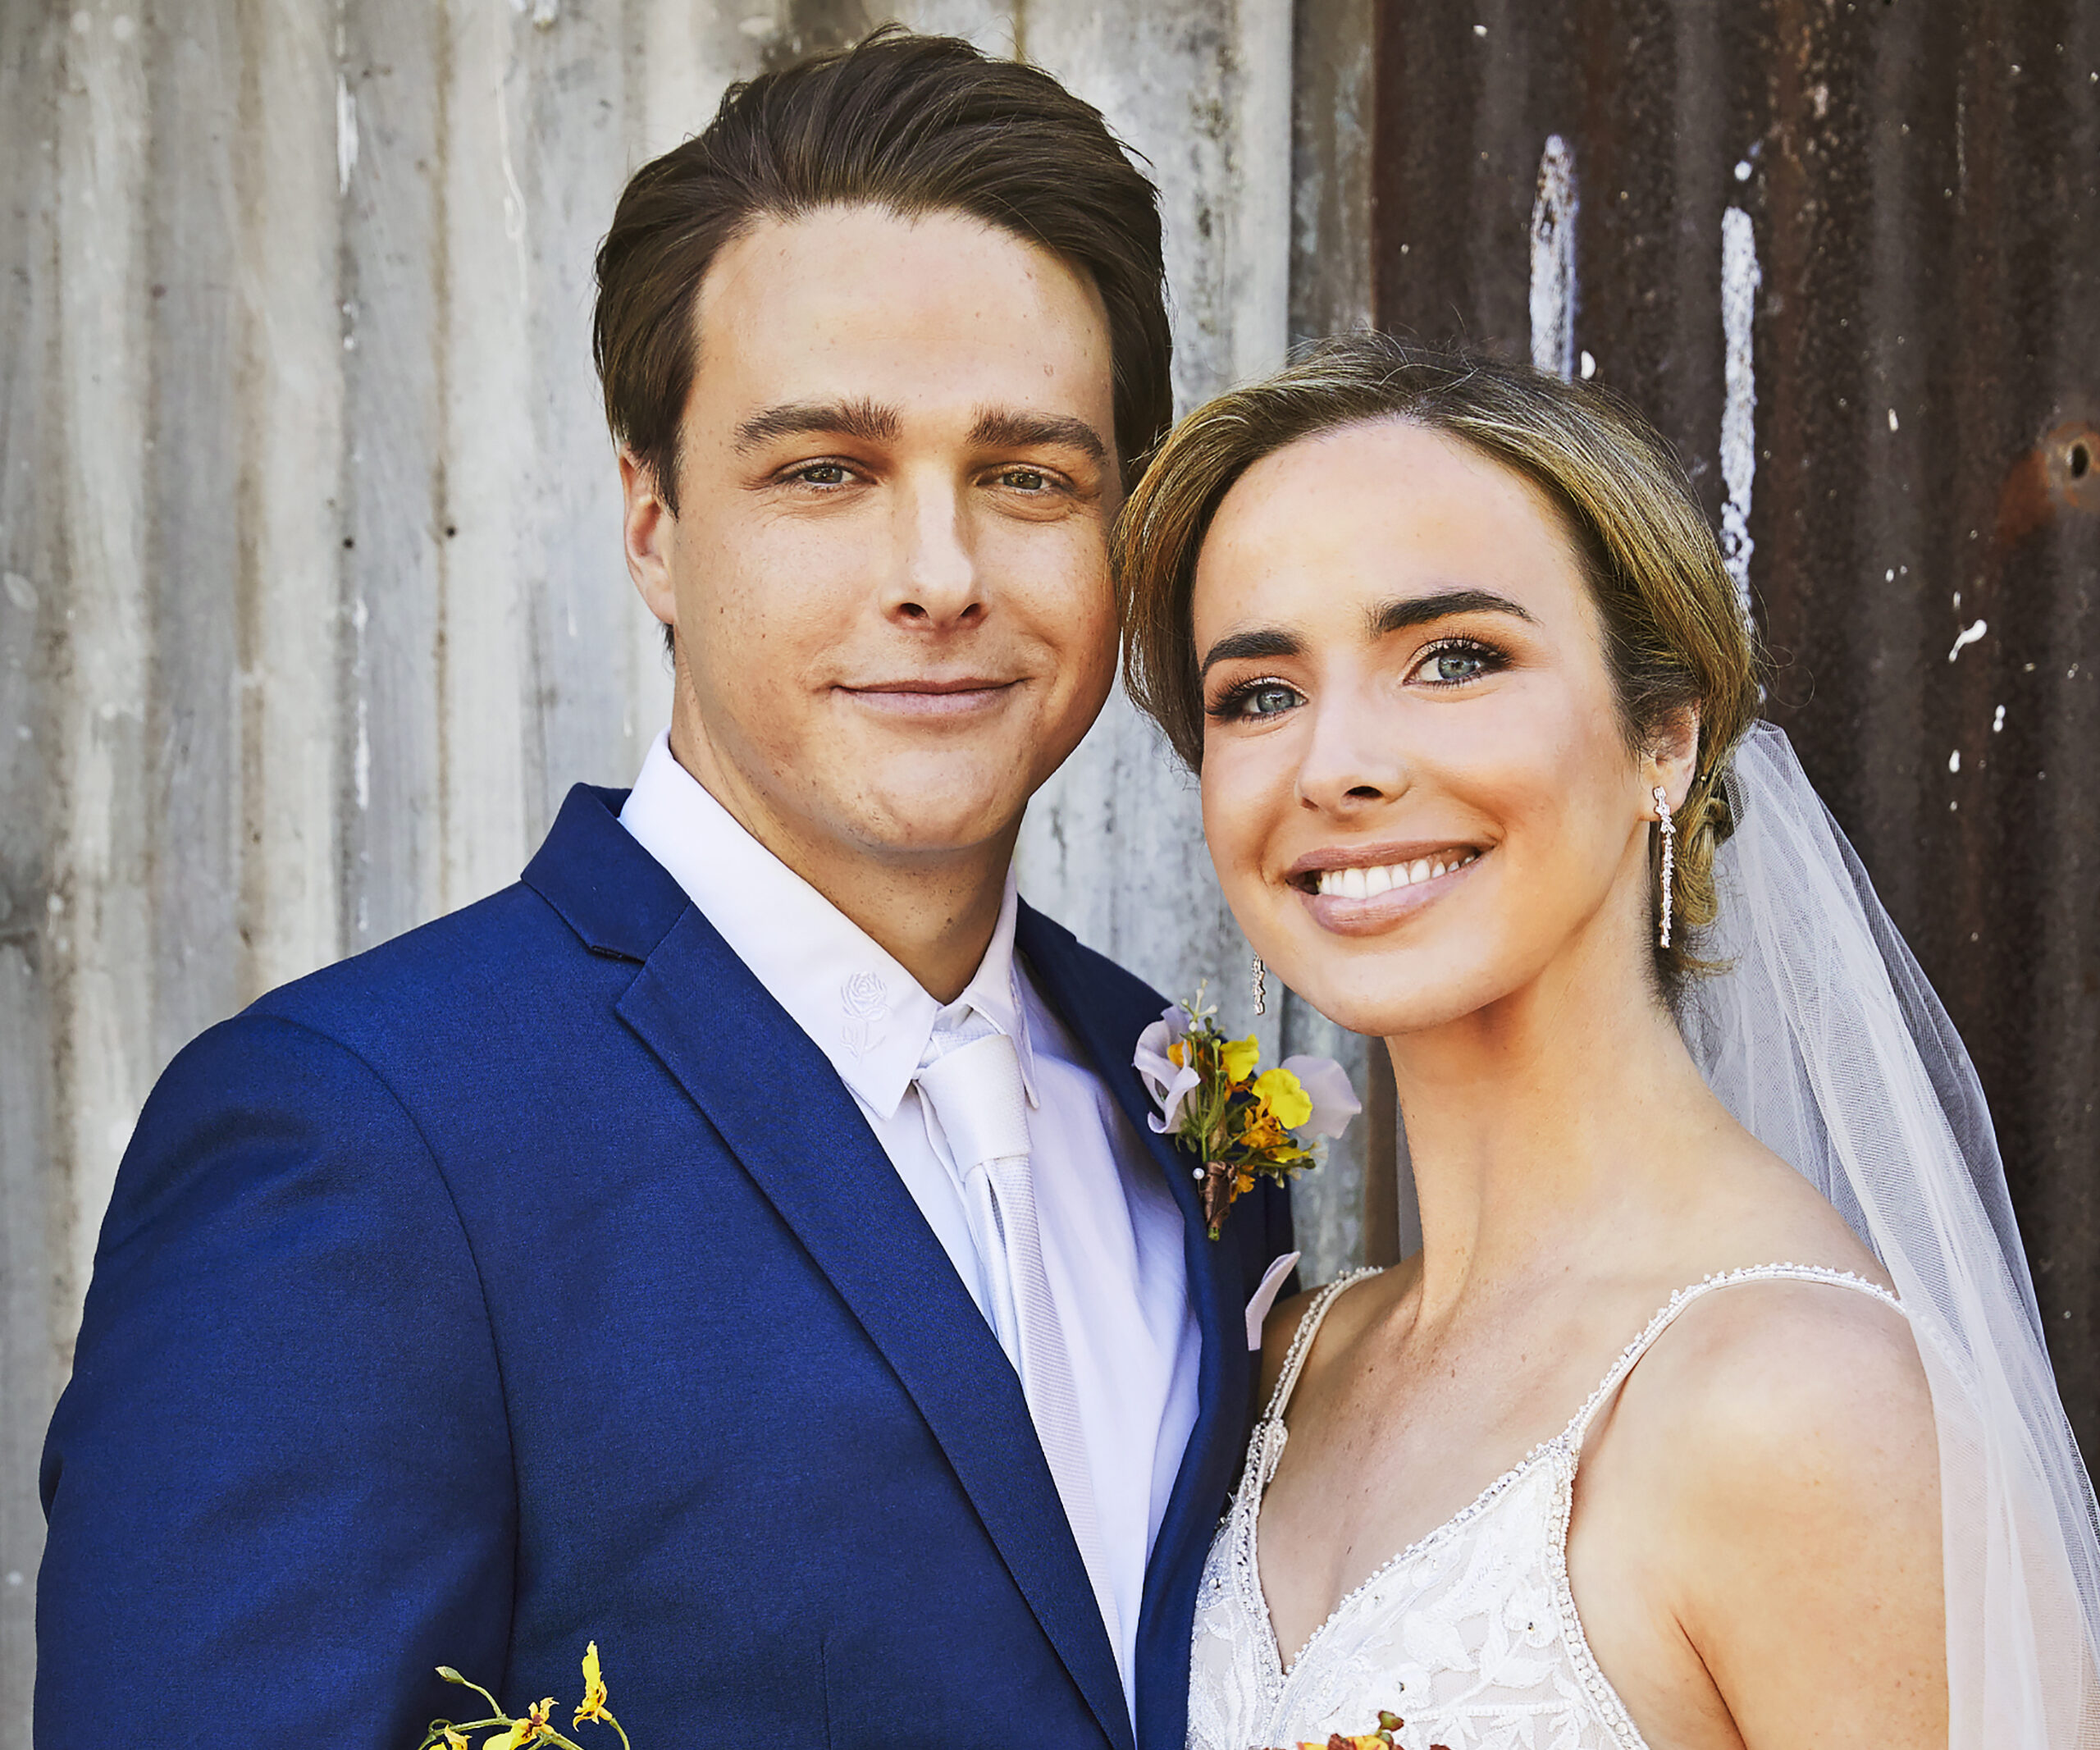 Home and Away’s Colby and Chelsea tie the knot! See all the photos from their rustic wedding day